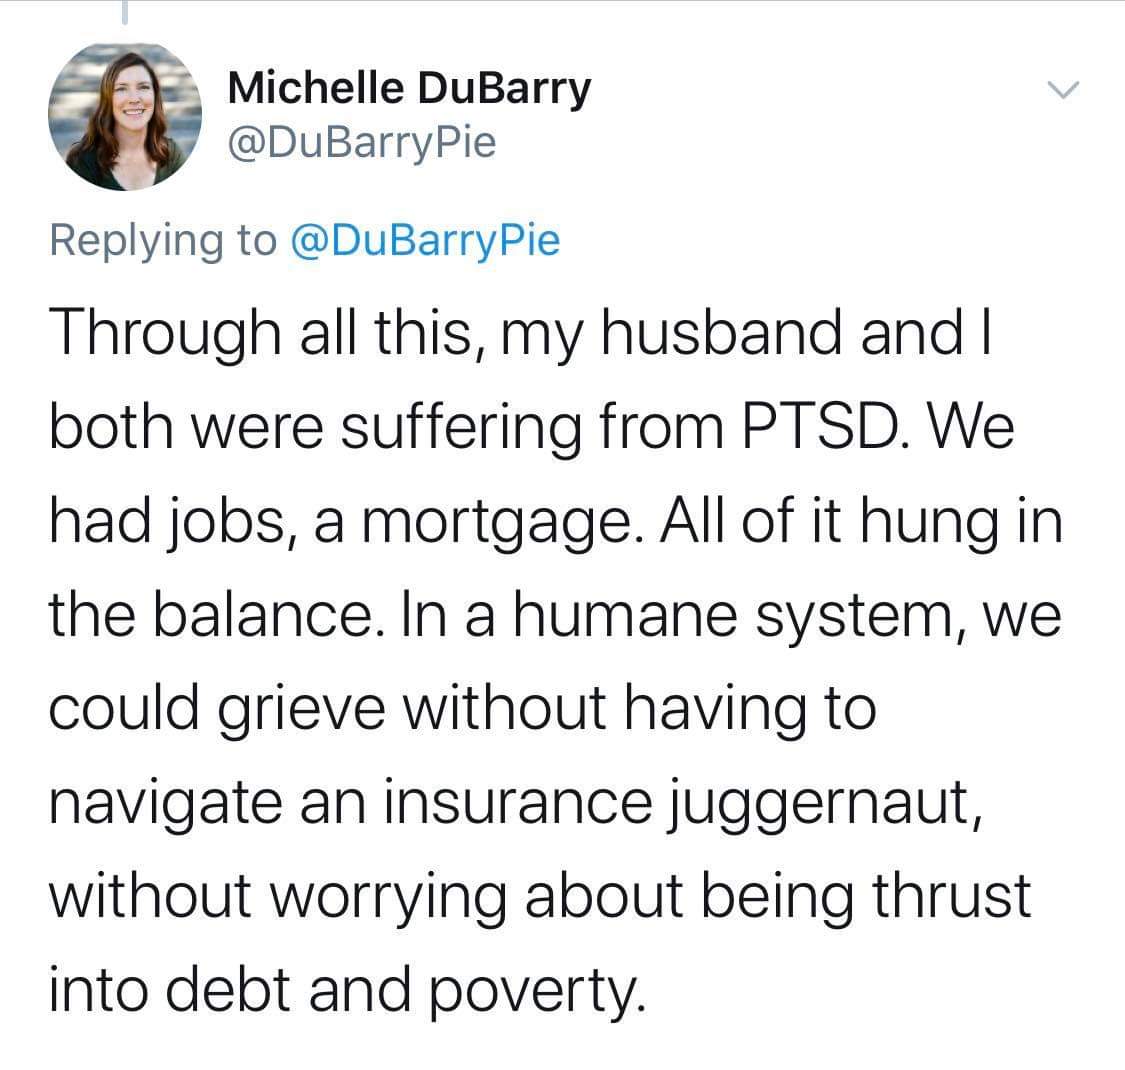 angle - Michelle DuBarry Through all this, my husband and I both were suffering from Ptsd. We had jobs, a mortgage. All of it hung in the balance. In a humane system, we could grieve without having to navigate an insurance juggernaut, without worrying abo